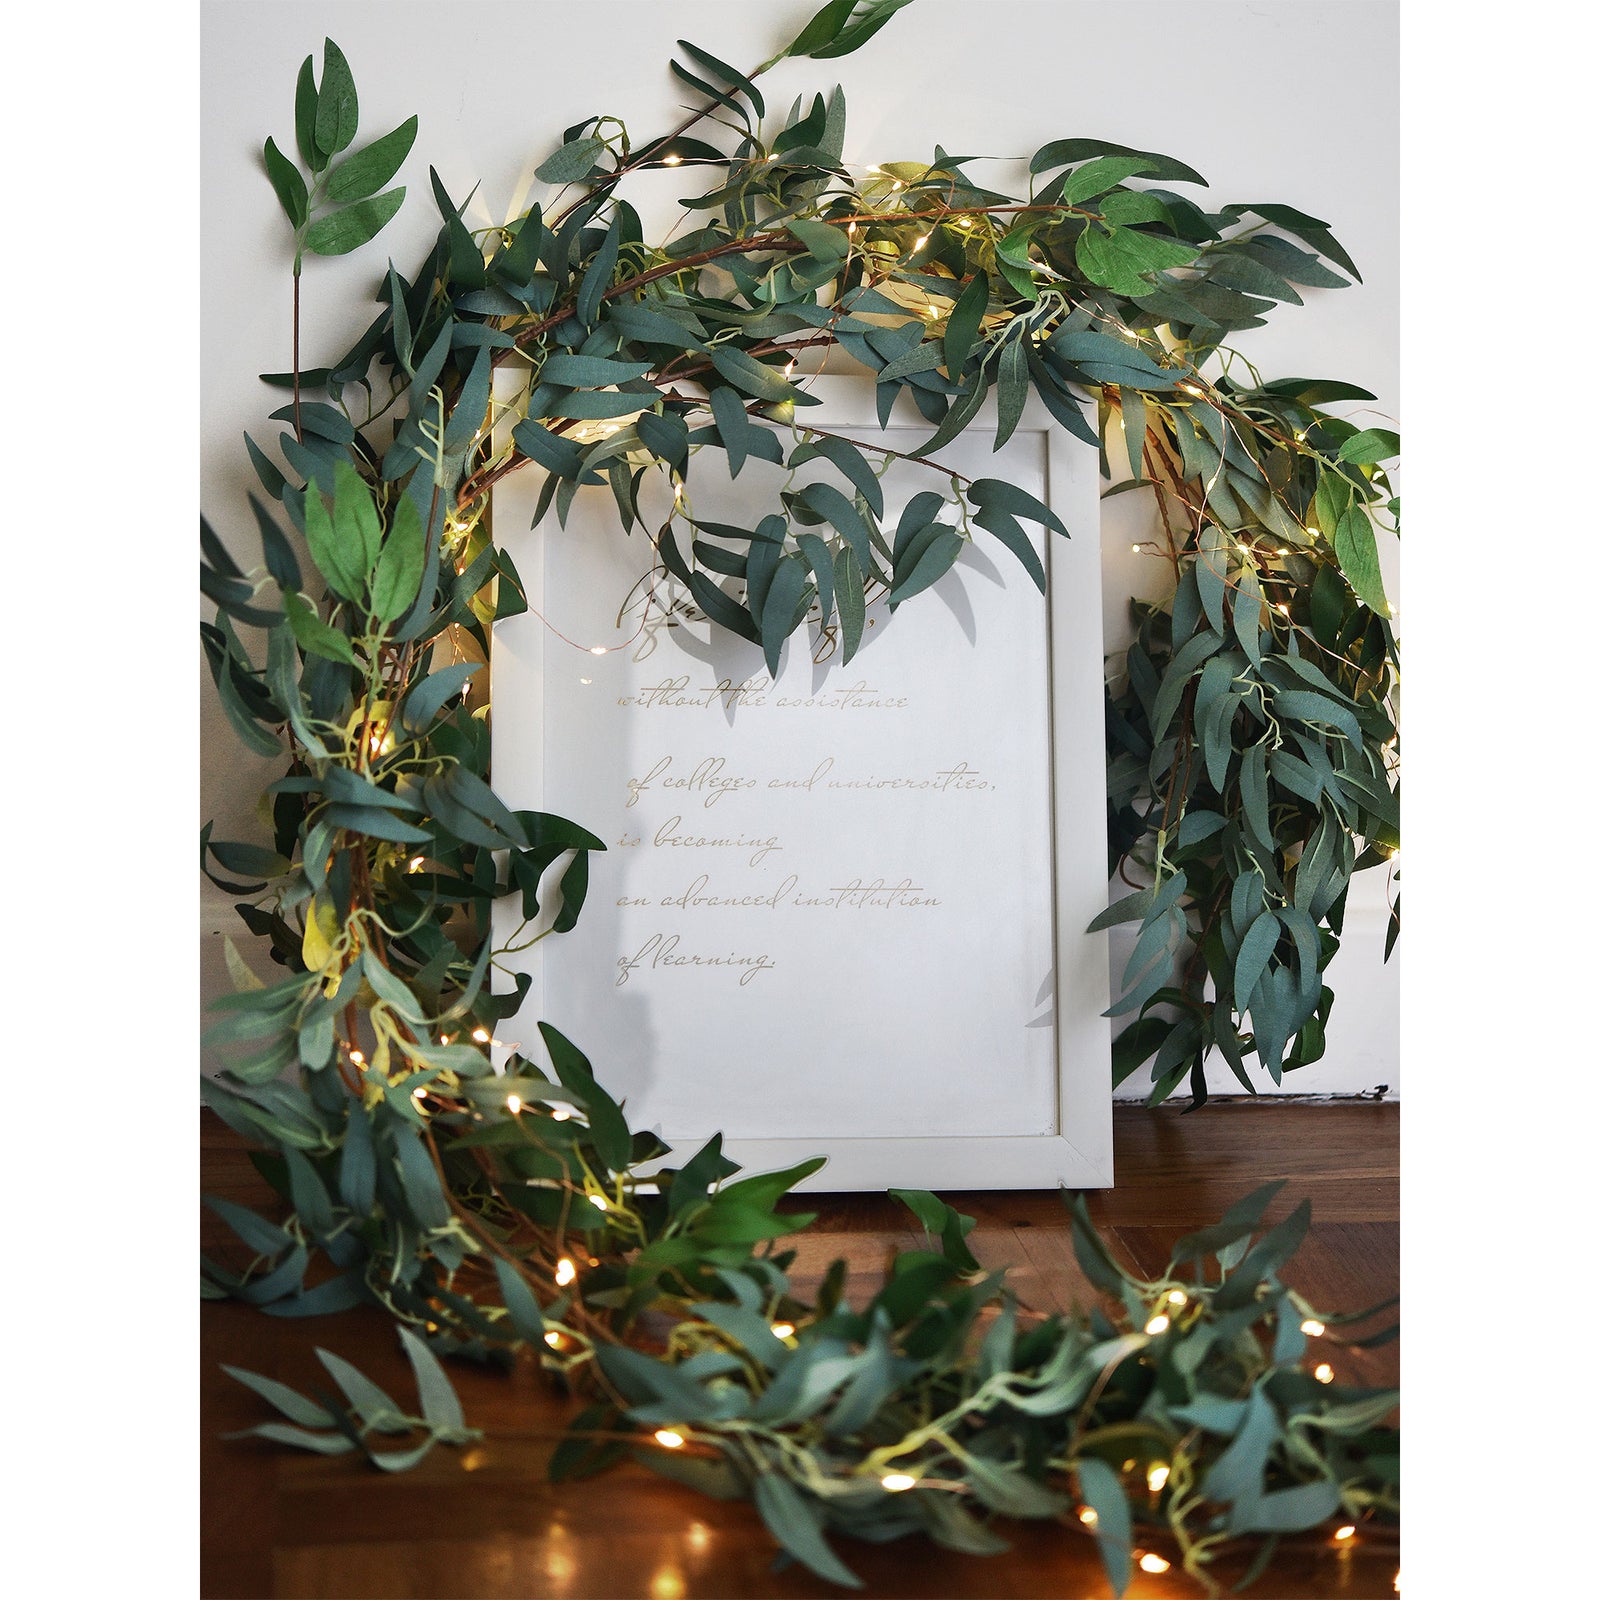 2 Mix Rustic Willow Garlands, Bendable Artificial Greenery Vine Leaves for Wedding Home Decoration with 33 Feet String Lights